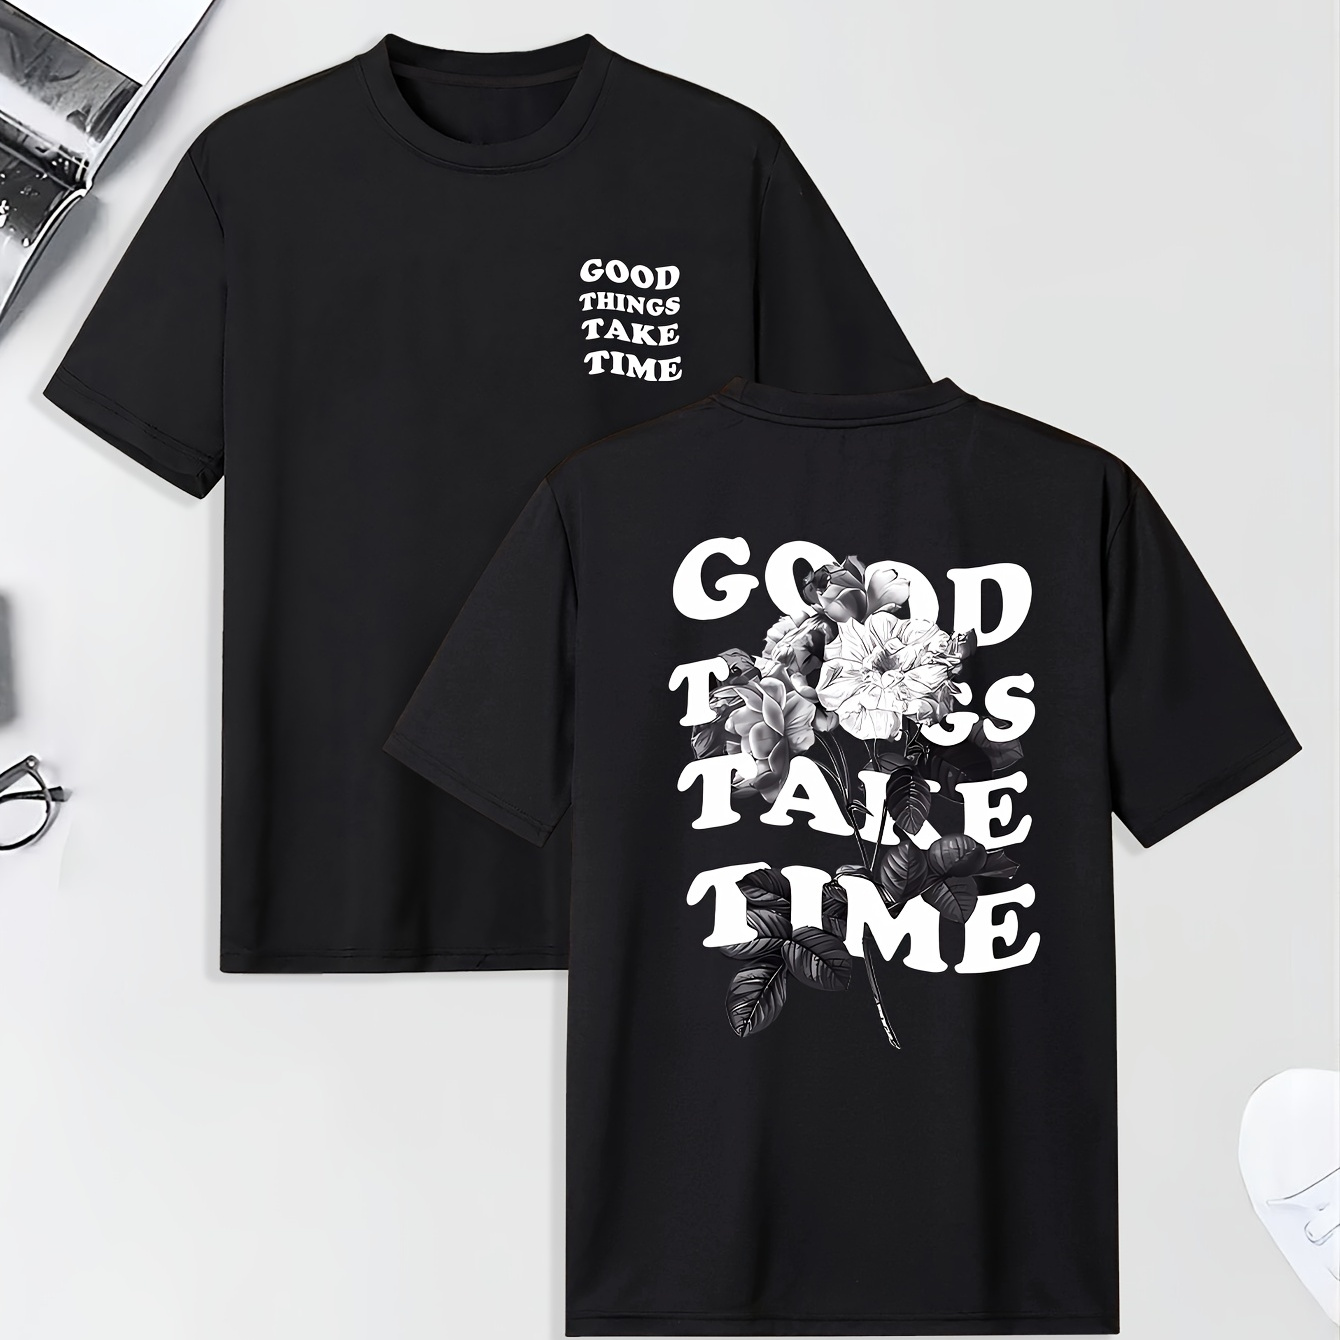 

Men's Good Things Take Time Print Short Sleeve T-shirts, Comfy Casual Elastic Crew Neck Tops For Men's Outdoor Activities